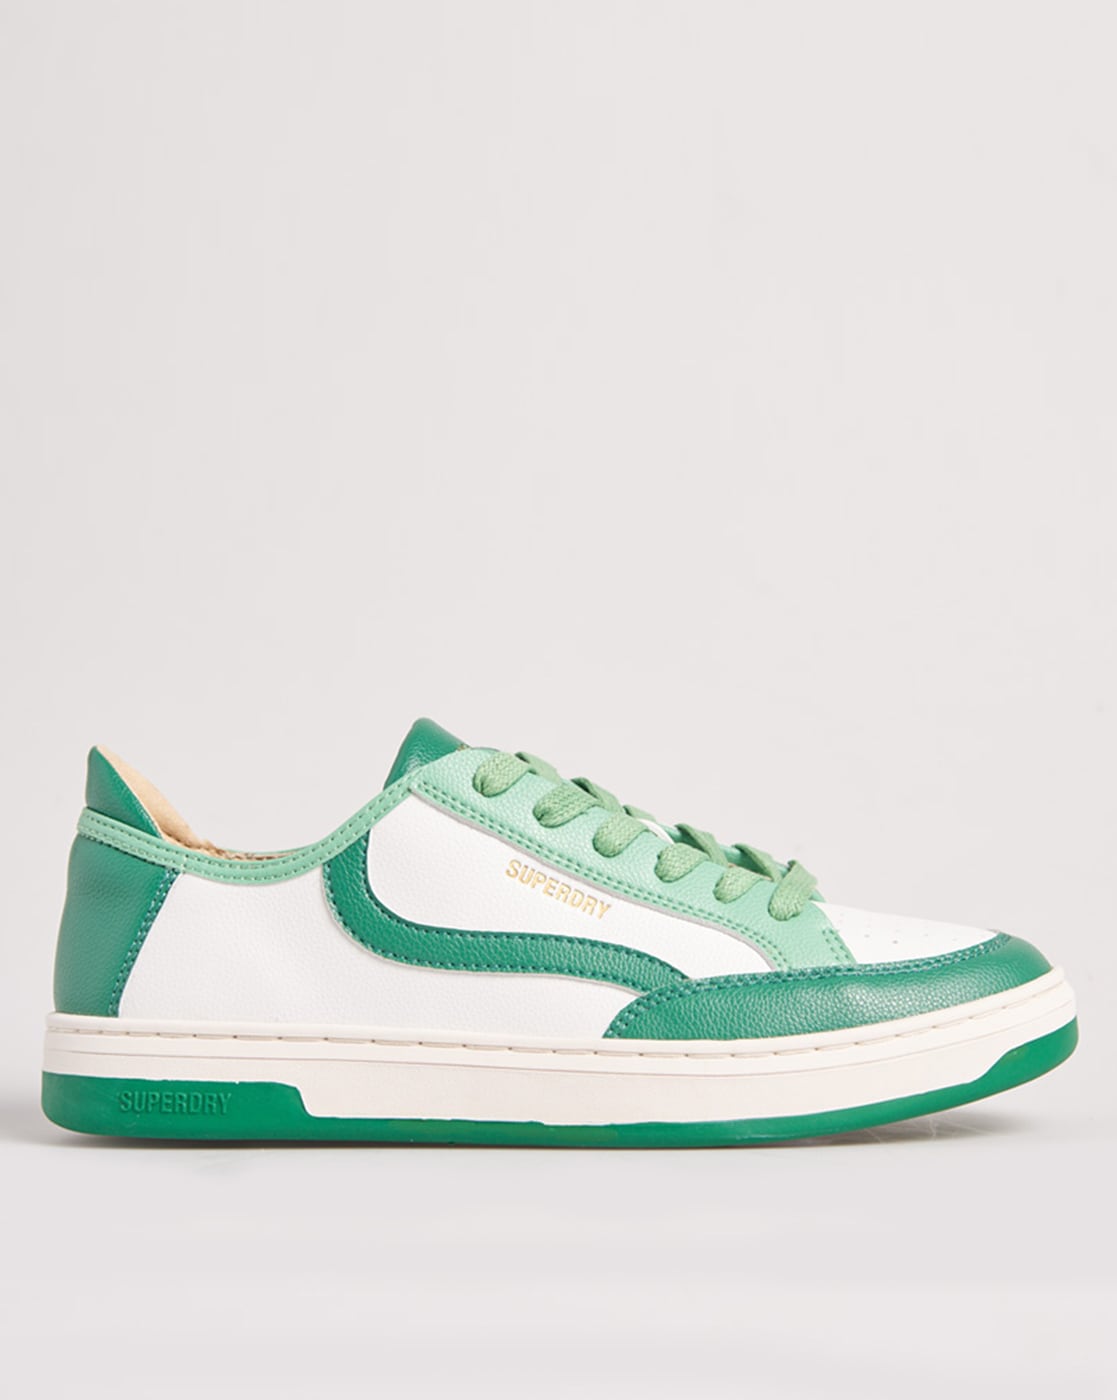 Women's Sneakers | Low Tops, High Tops & More | Superdry US